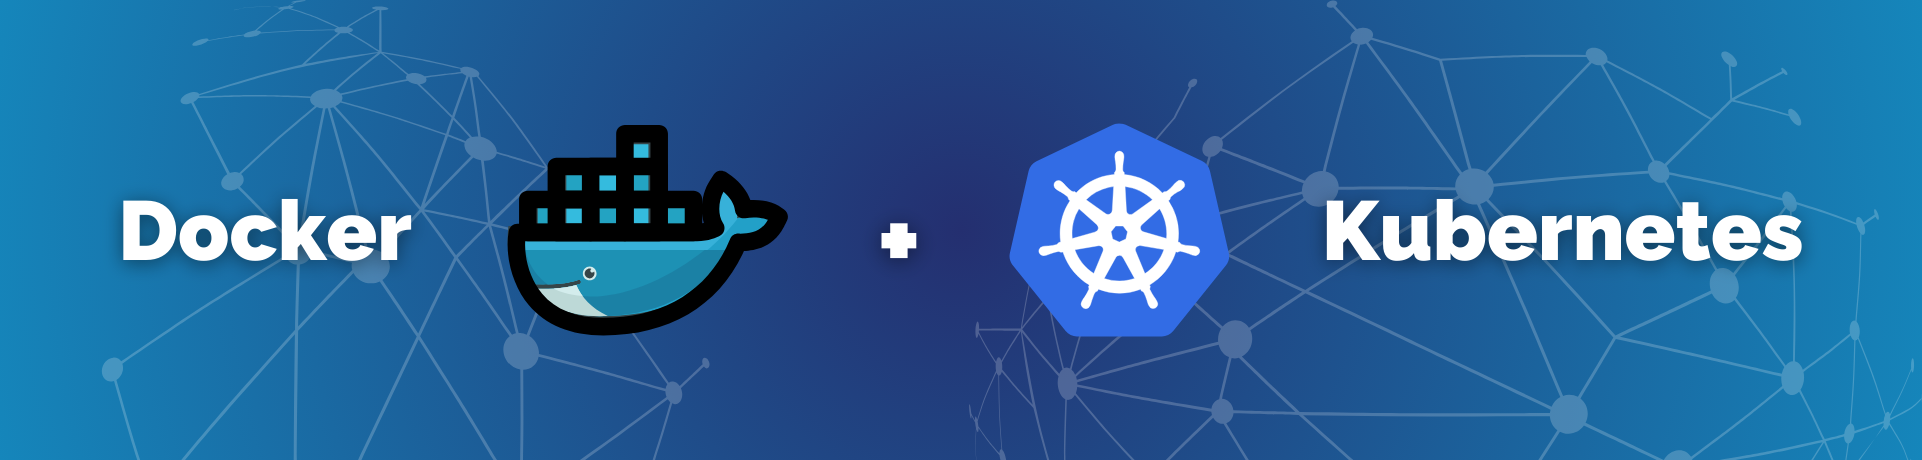 Docker and Kubernetes: A Powerful Duo for Containerization and Automation Image